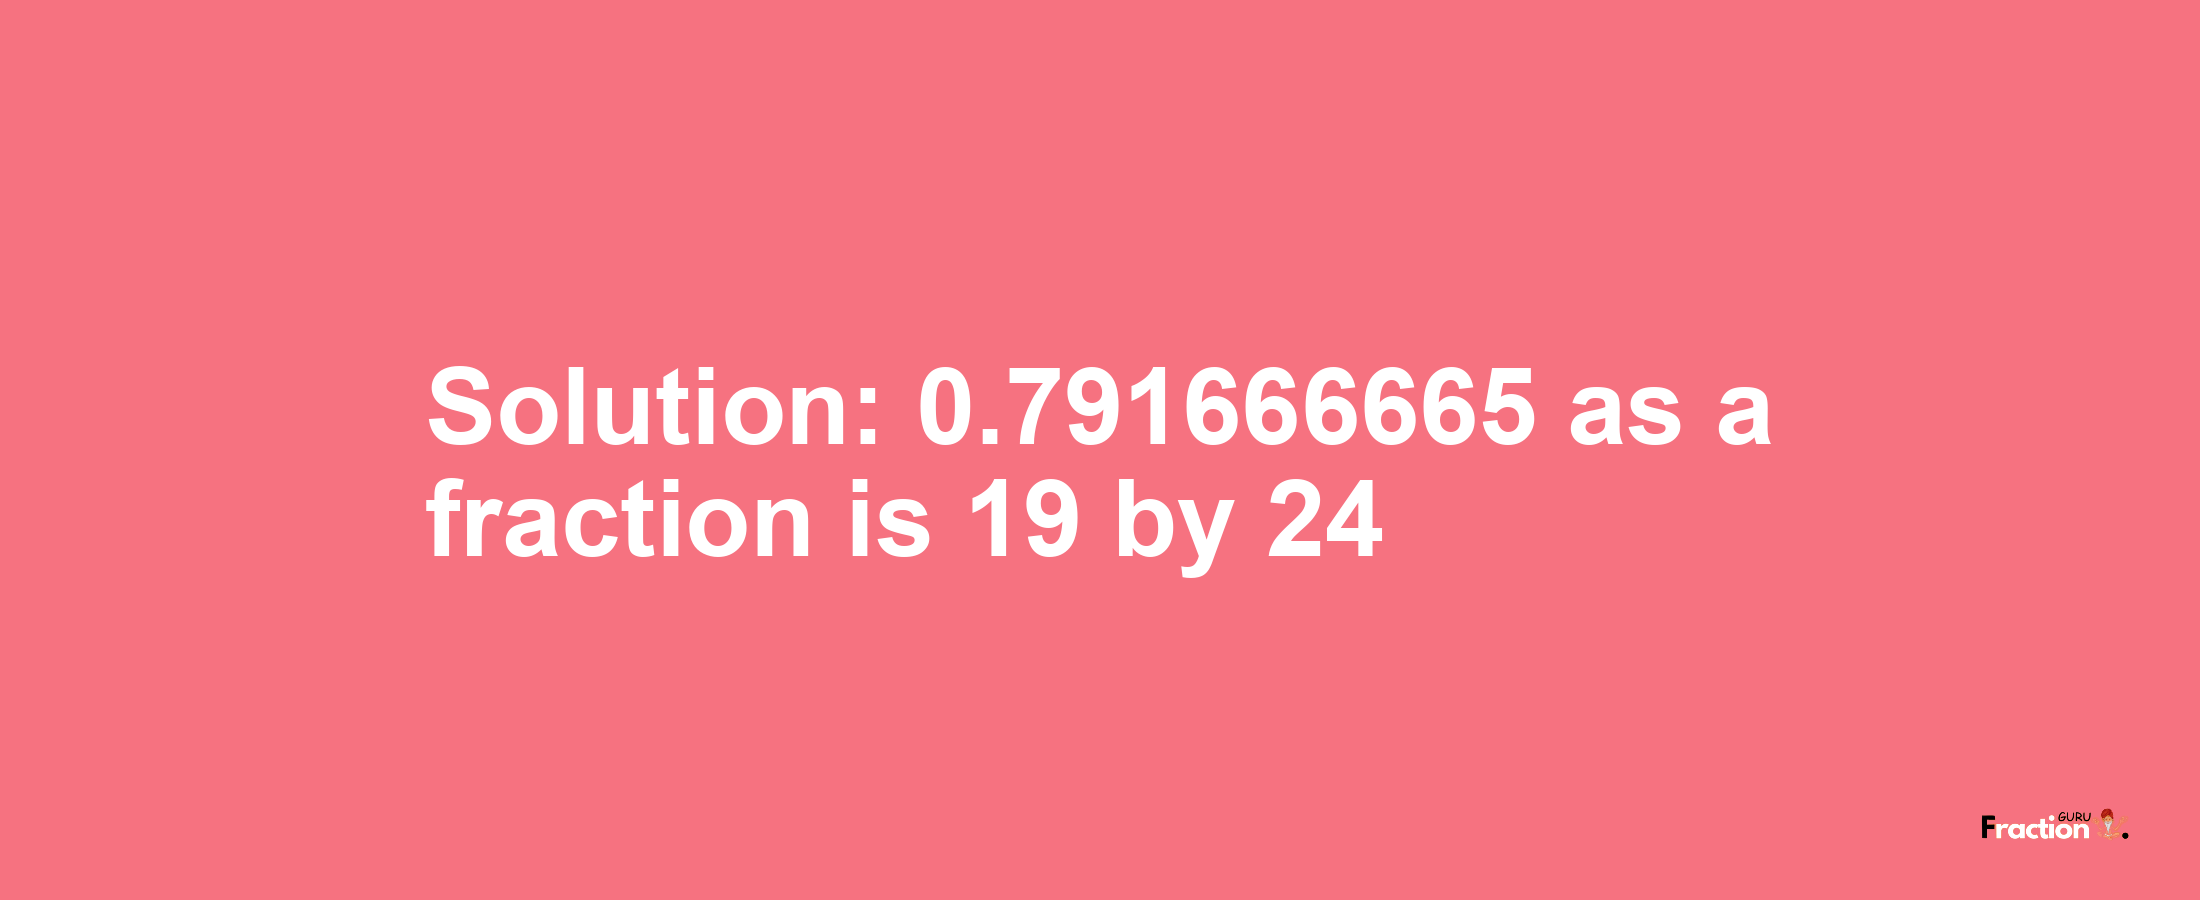 Solution:0.791666665 as a fraction is 19/24